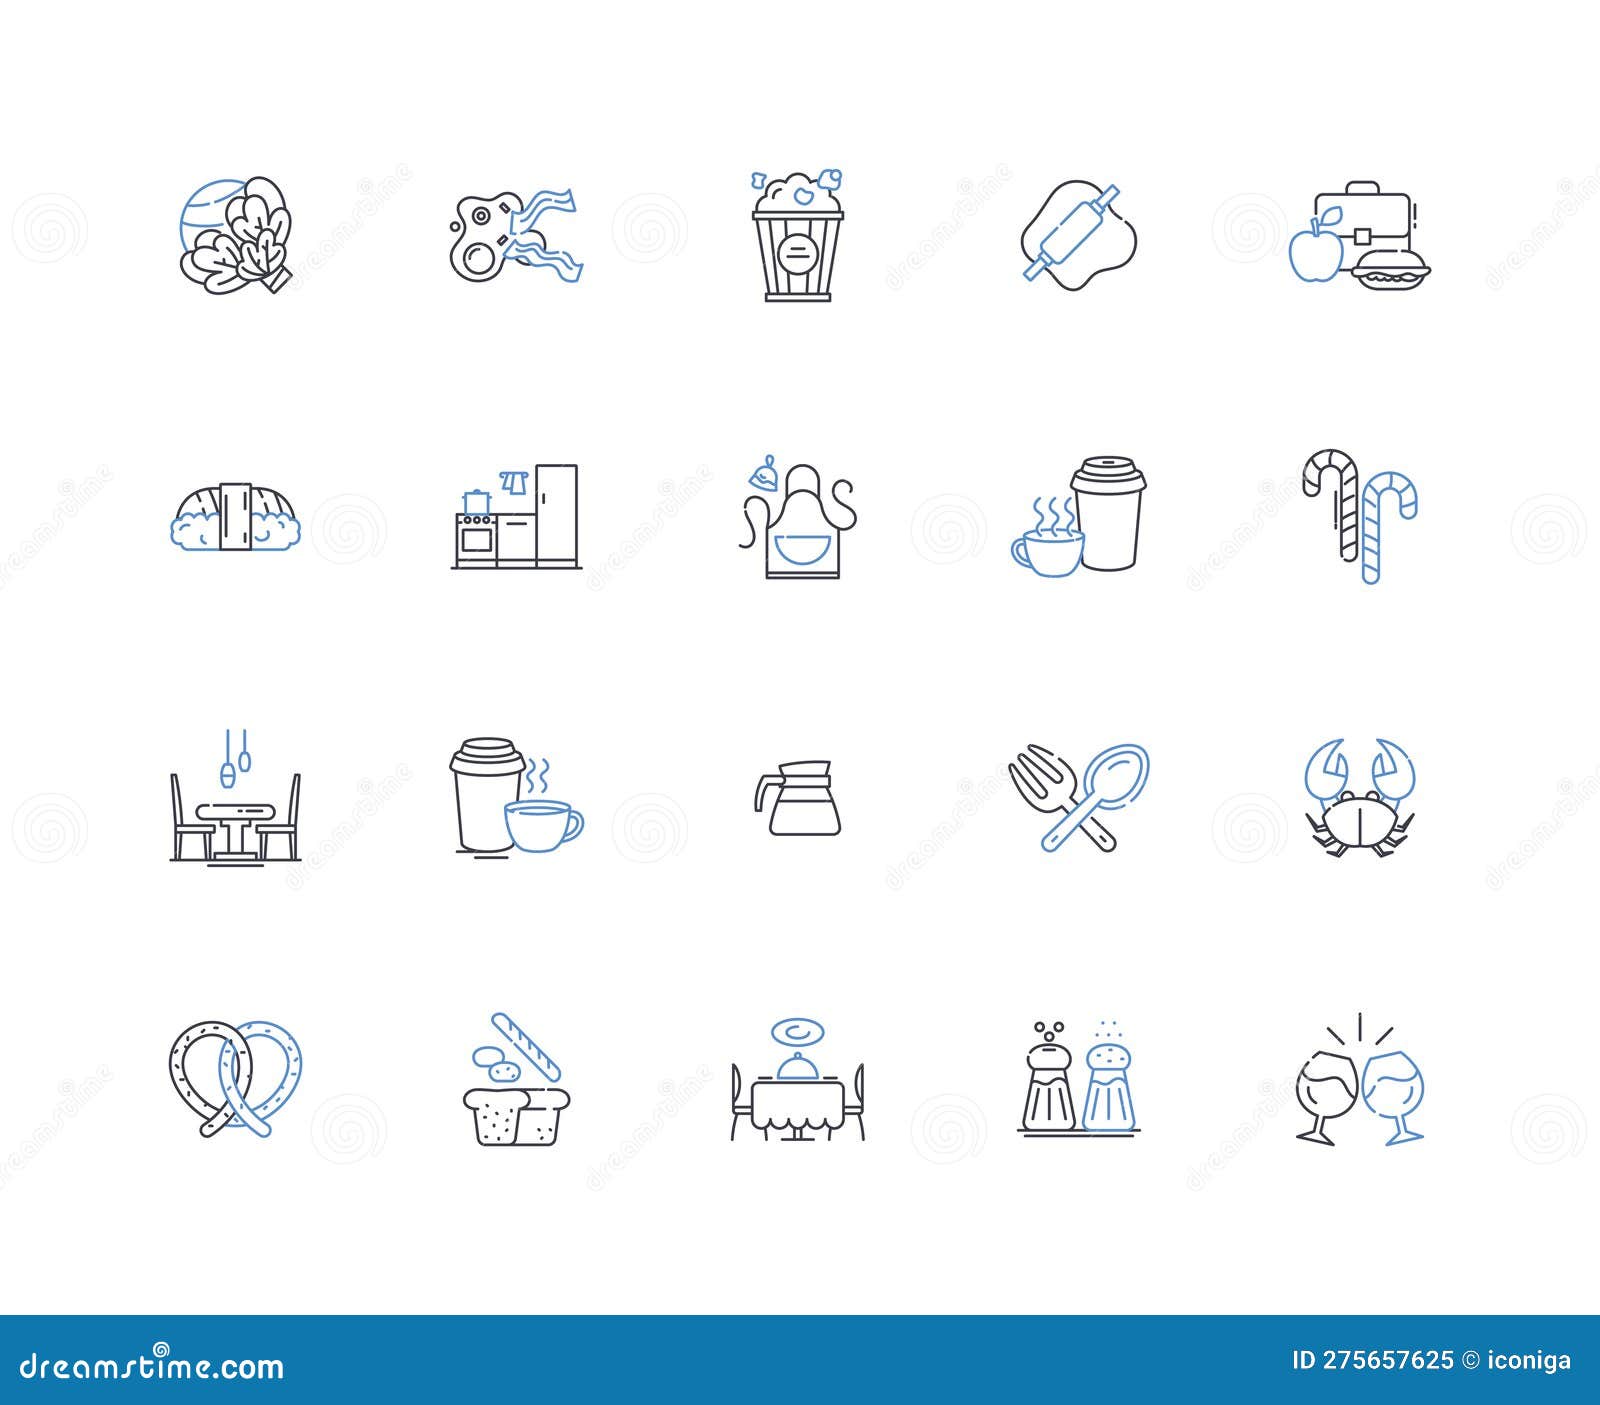 cookery establishment line icons collection. kitchen, restaurant, bistro, pub, cafe, brasserie, diner  and linear